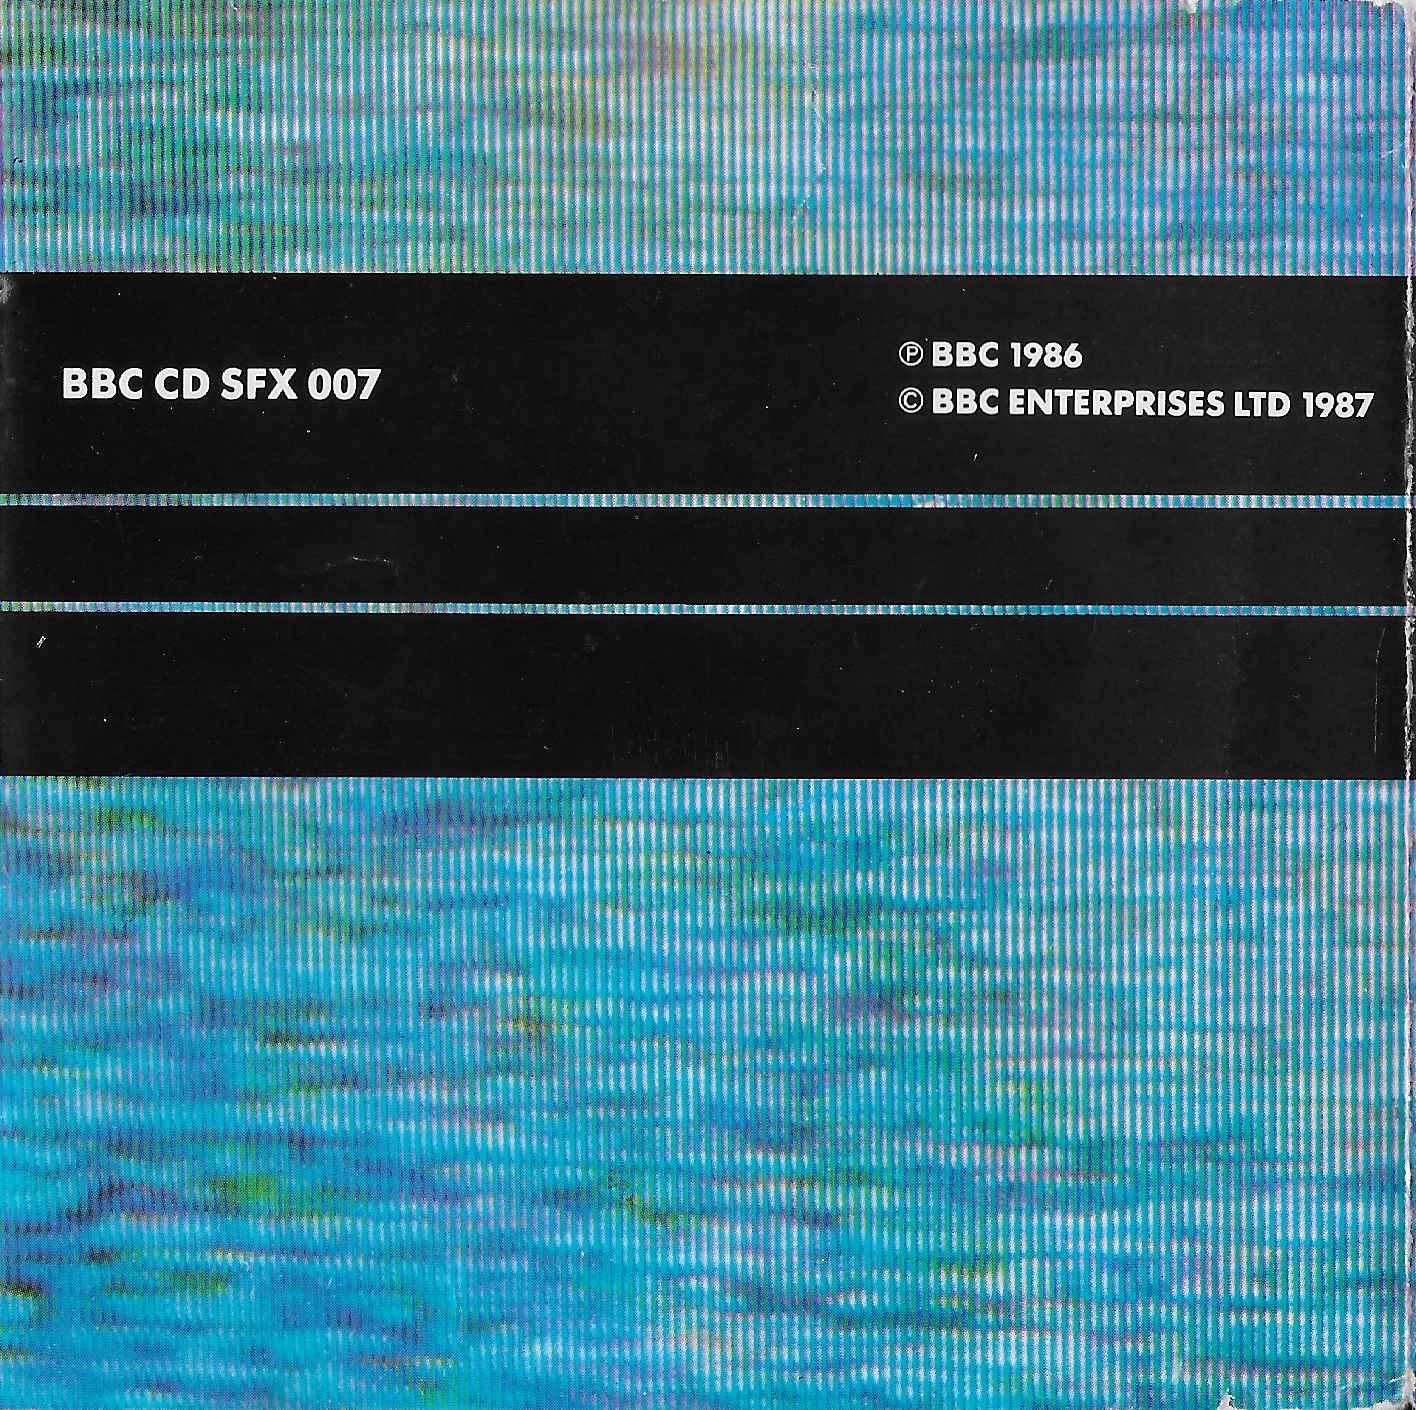 Middle of cover of BBCCD SFX007